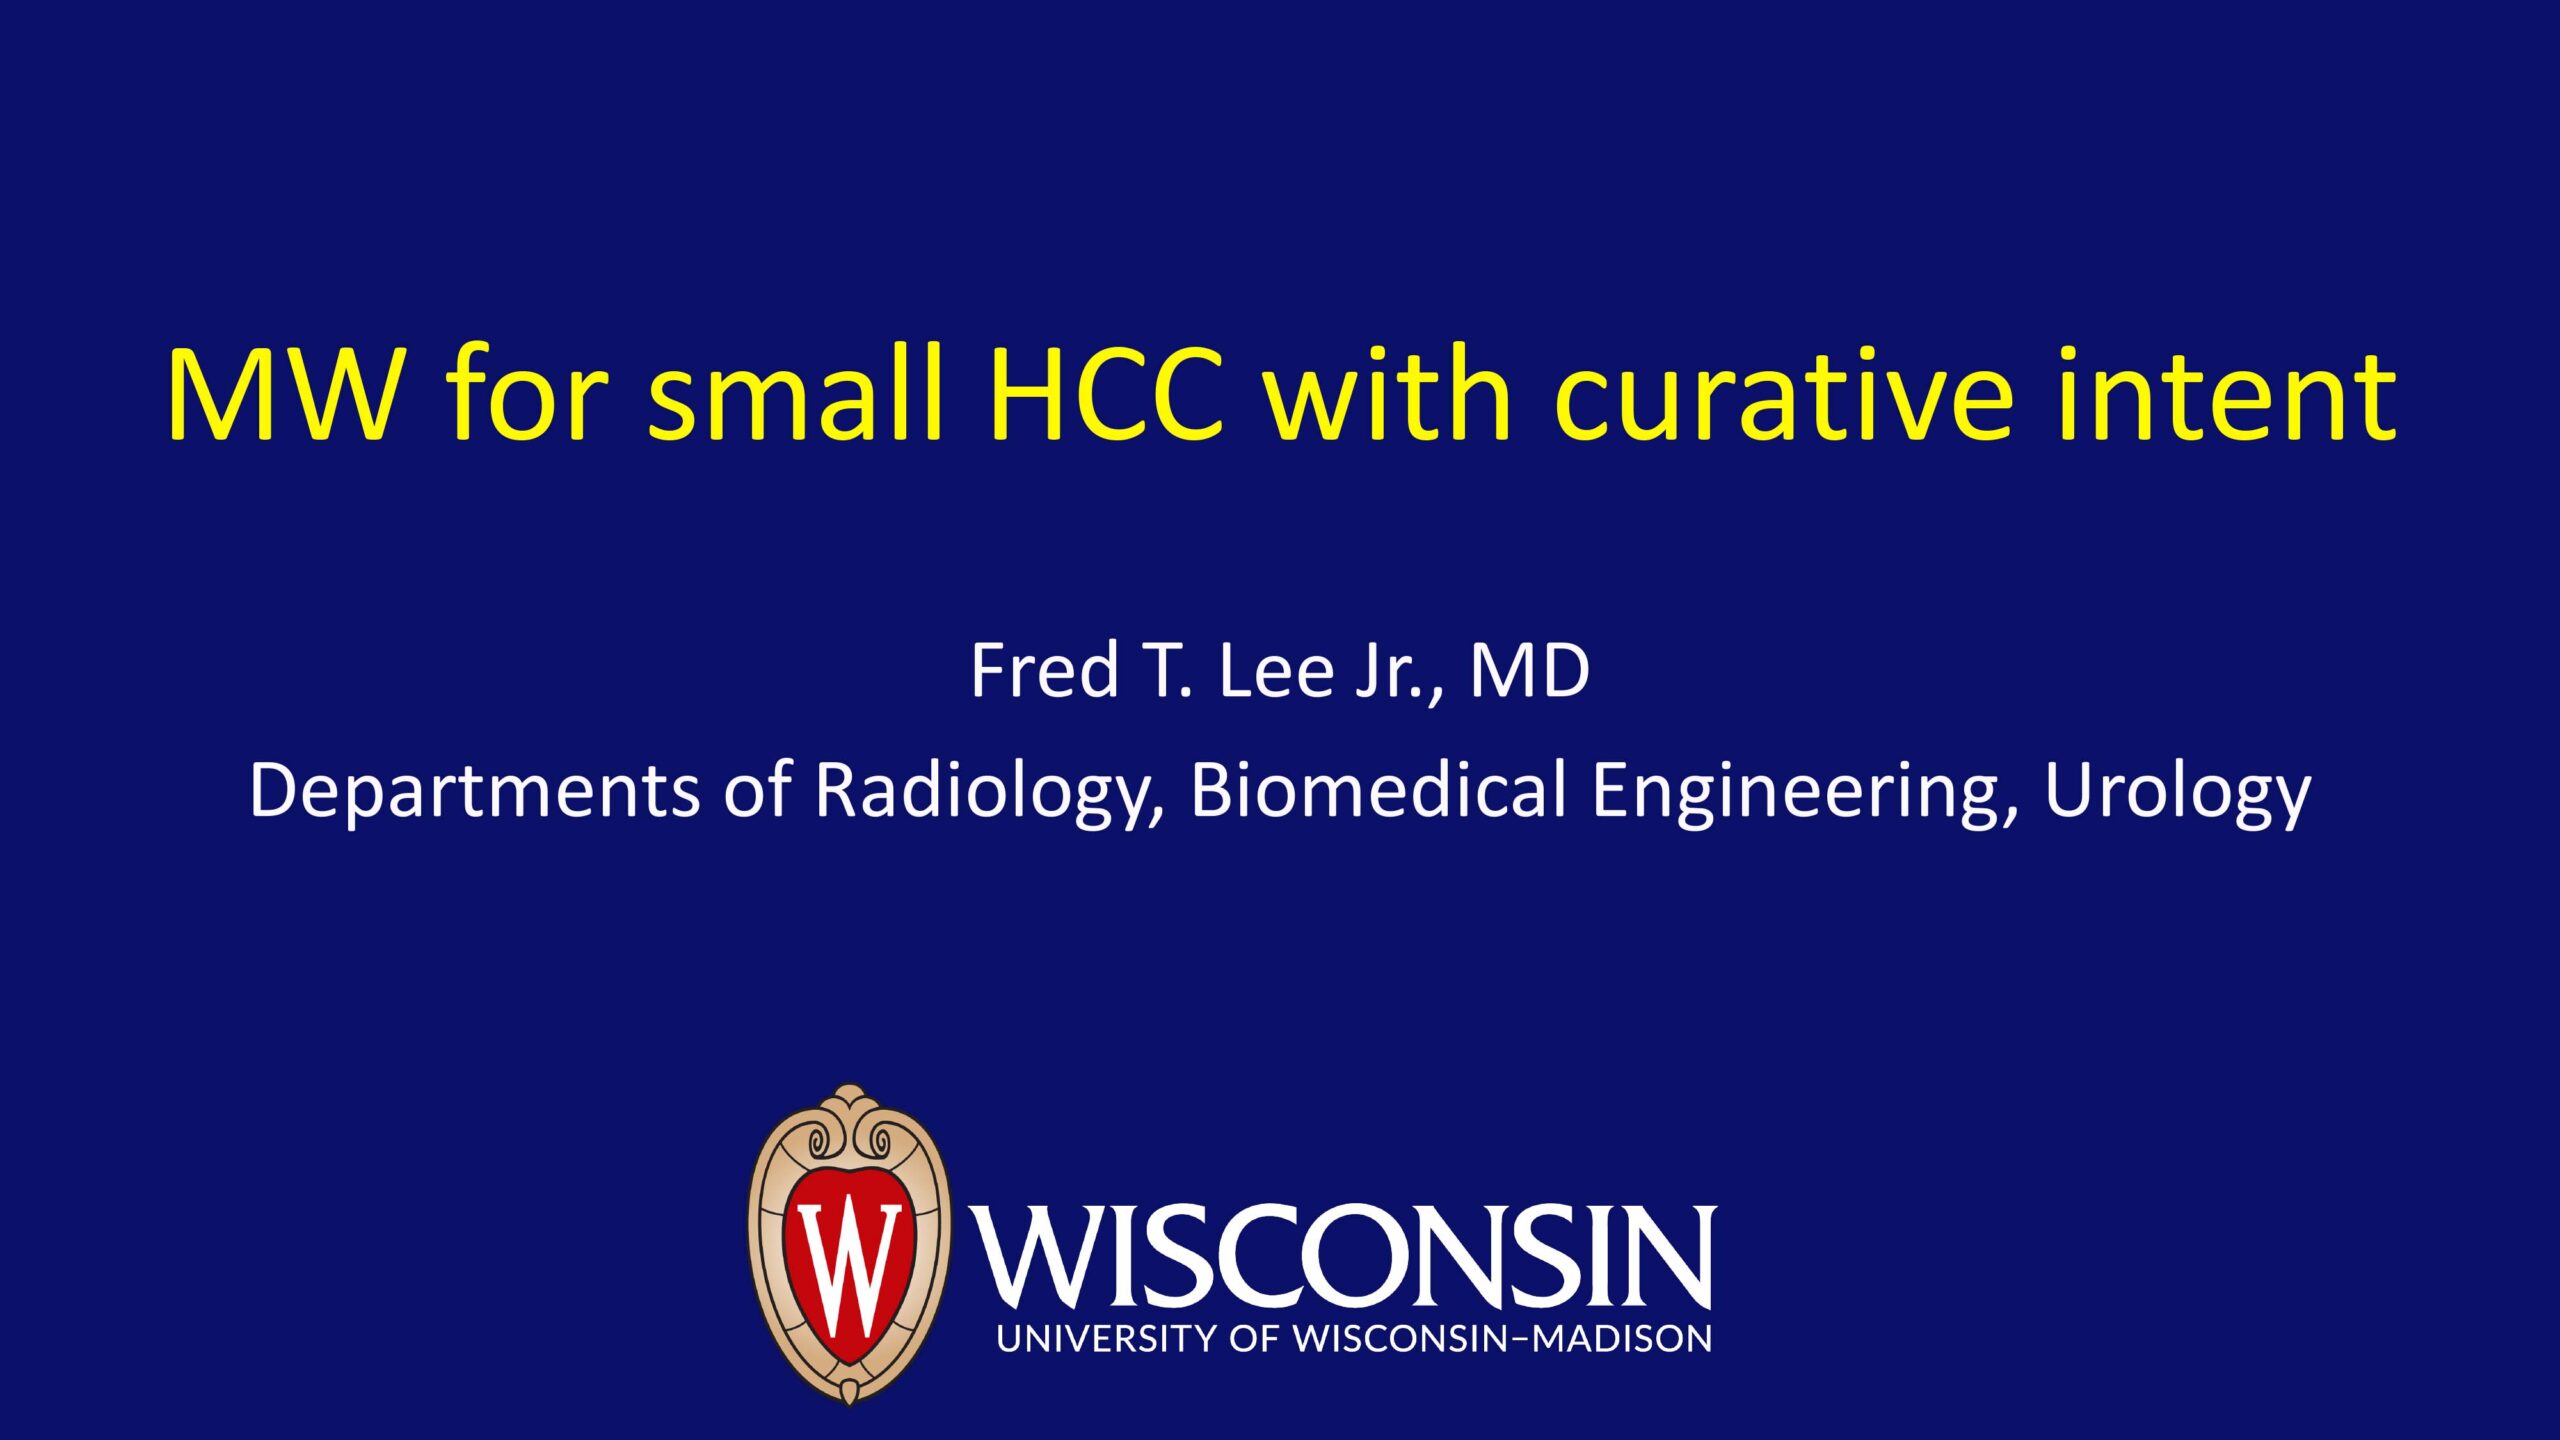 Ablation with a curative intent in HCC